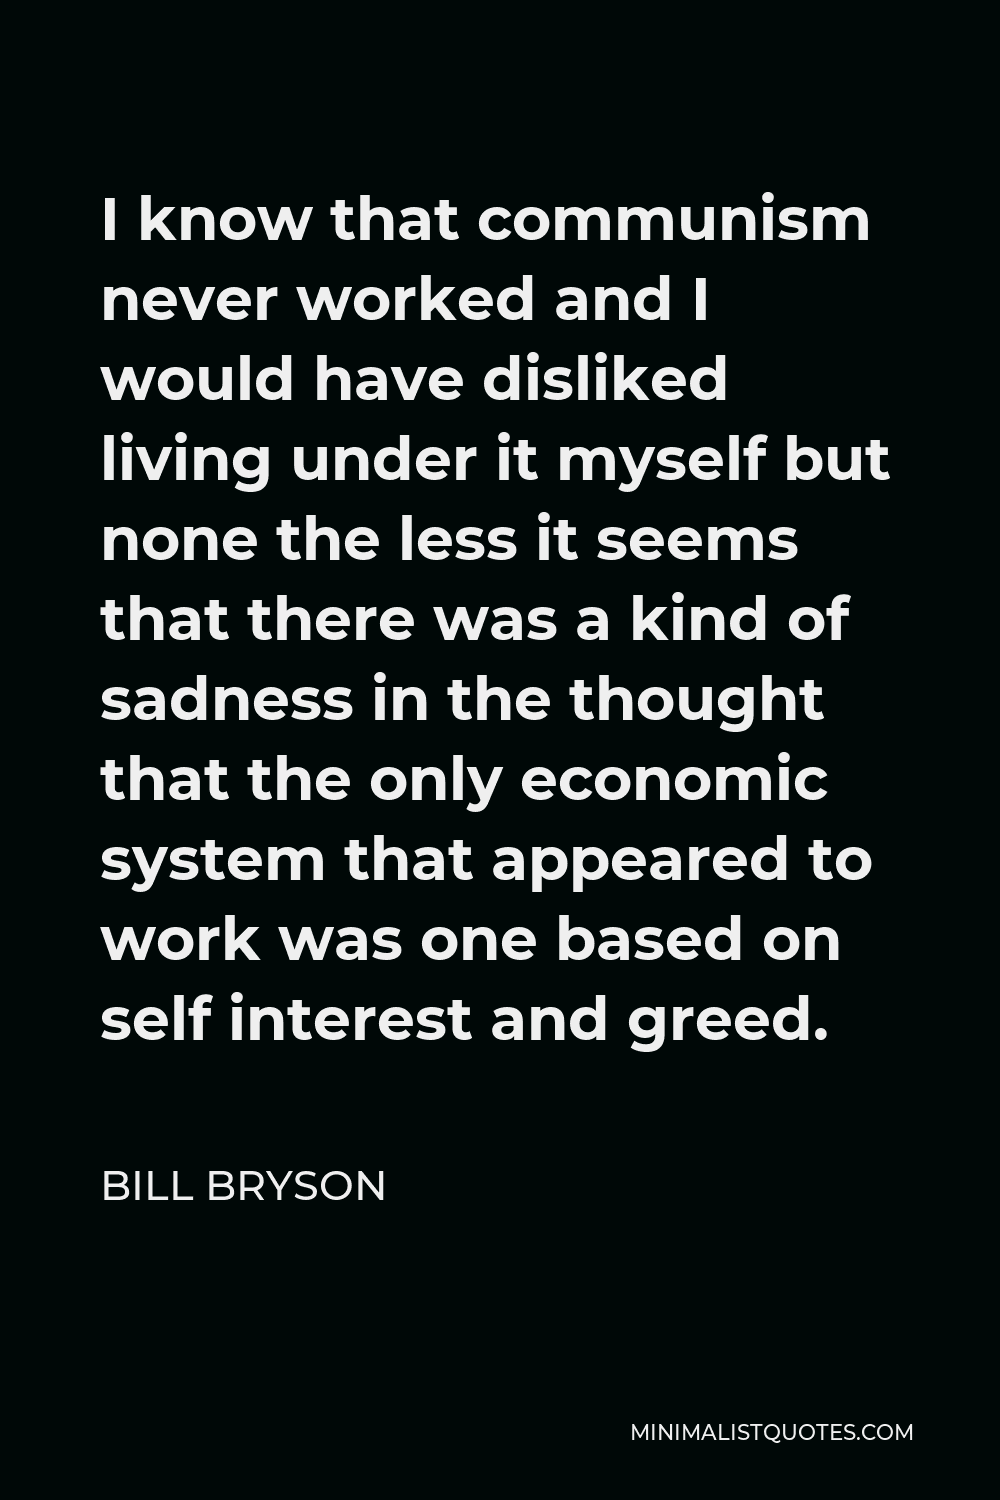 Bill Bryson Quote - I know that communism never worked and I would have disliked living under it myself but none the less it seems that there was a kind of sadness in the thought that the only economic system that appeared to work was one based on self interest and greed.